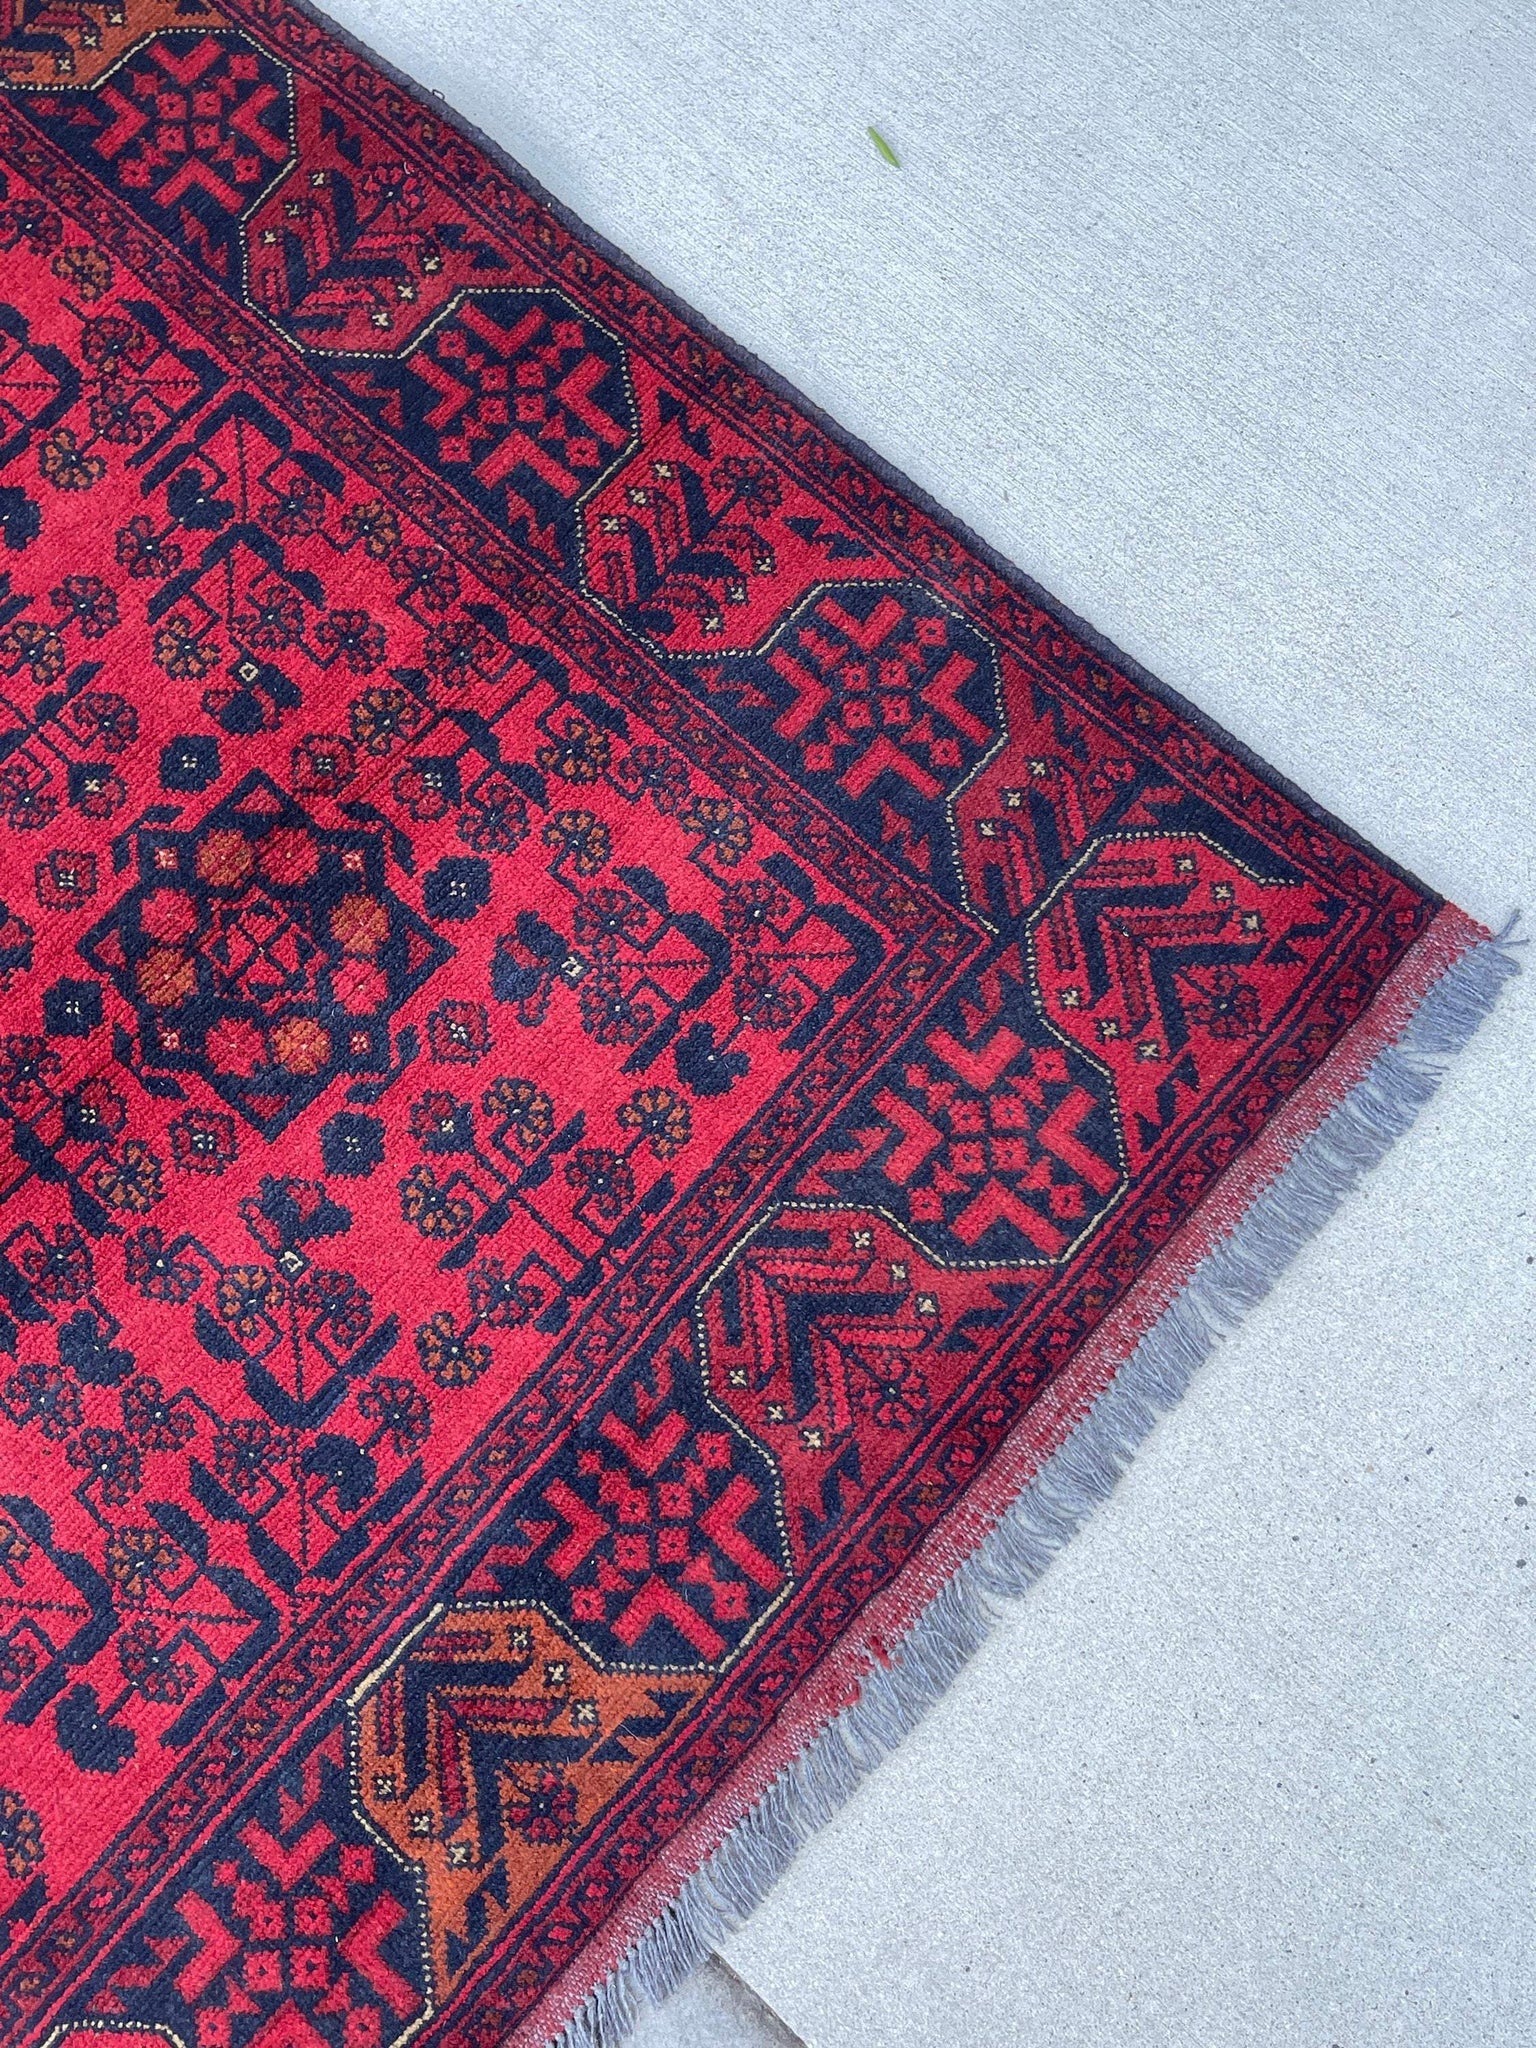 4x7 (125x200) Red Navy Blue Brown Handmade Afghan Rug | Hand Knotted Hand Woven Wool | Vintage Tribal Turkish Moroccan Oriental Persian